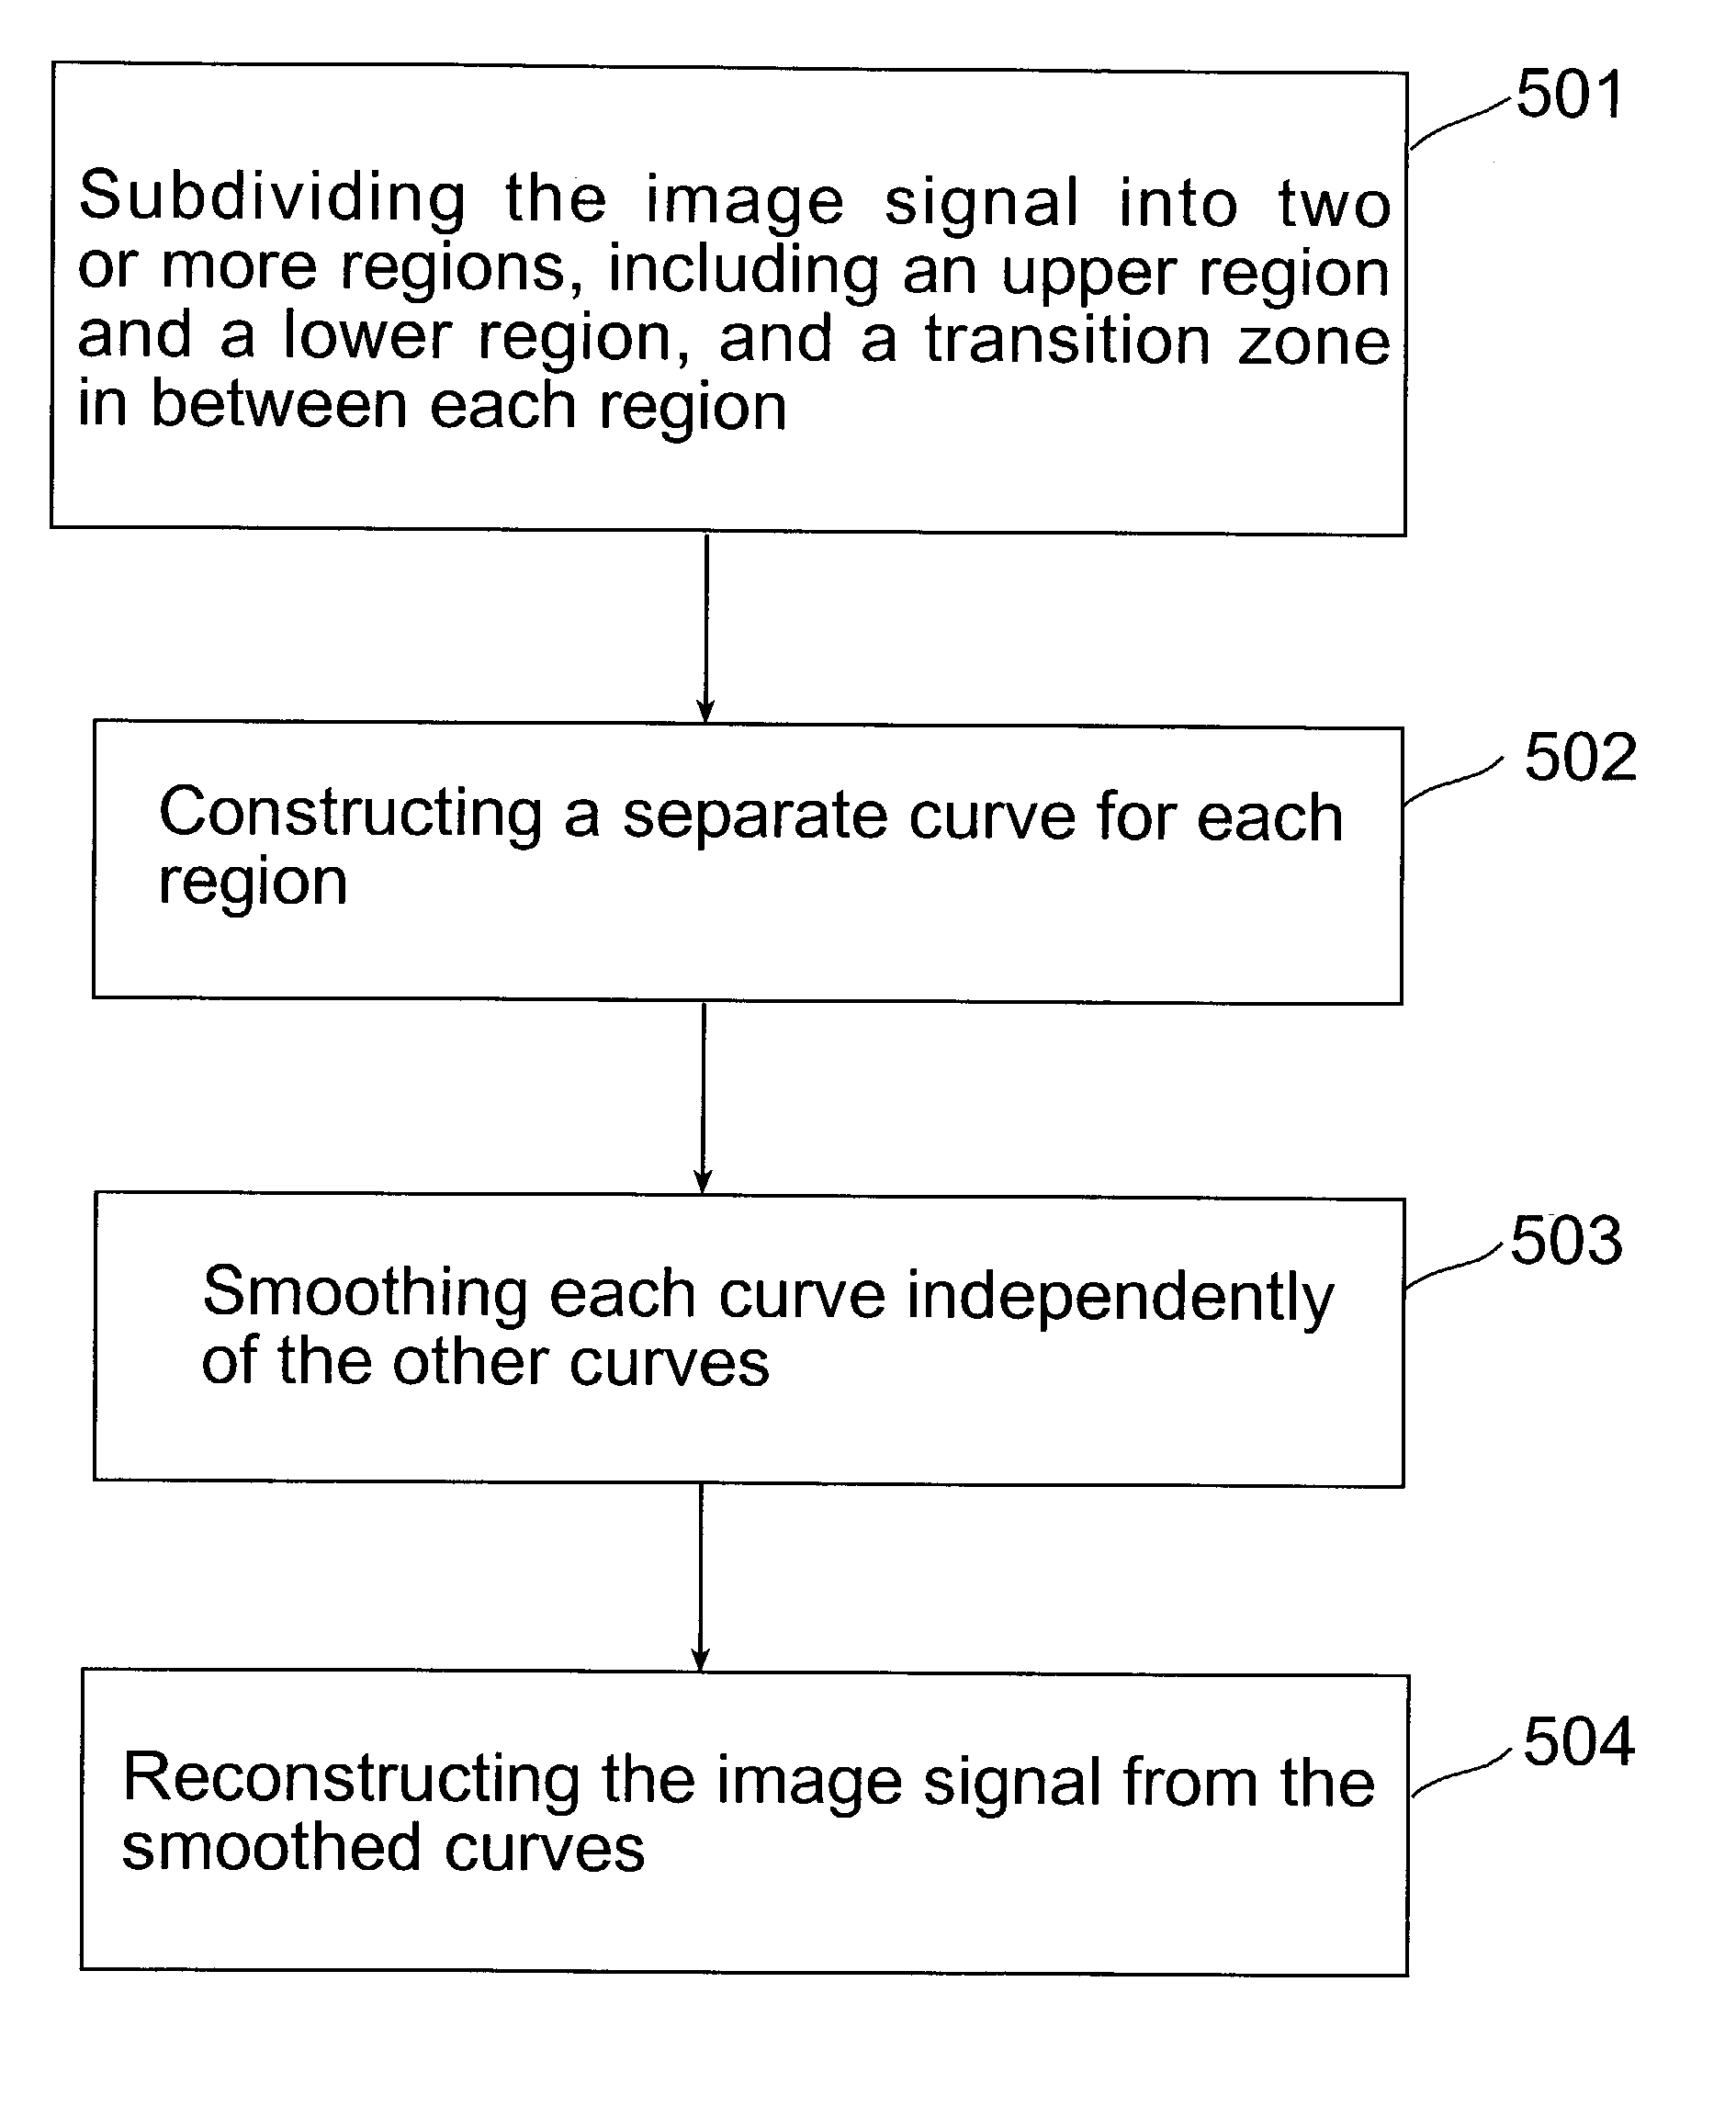 Image upscaling by joint optimization of low and mid-level image variables